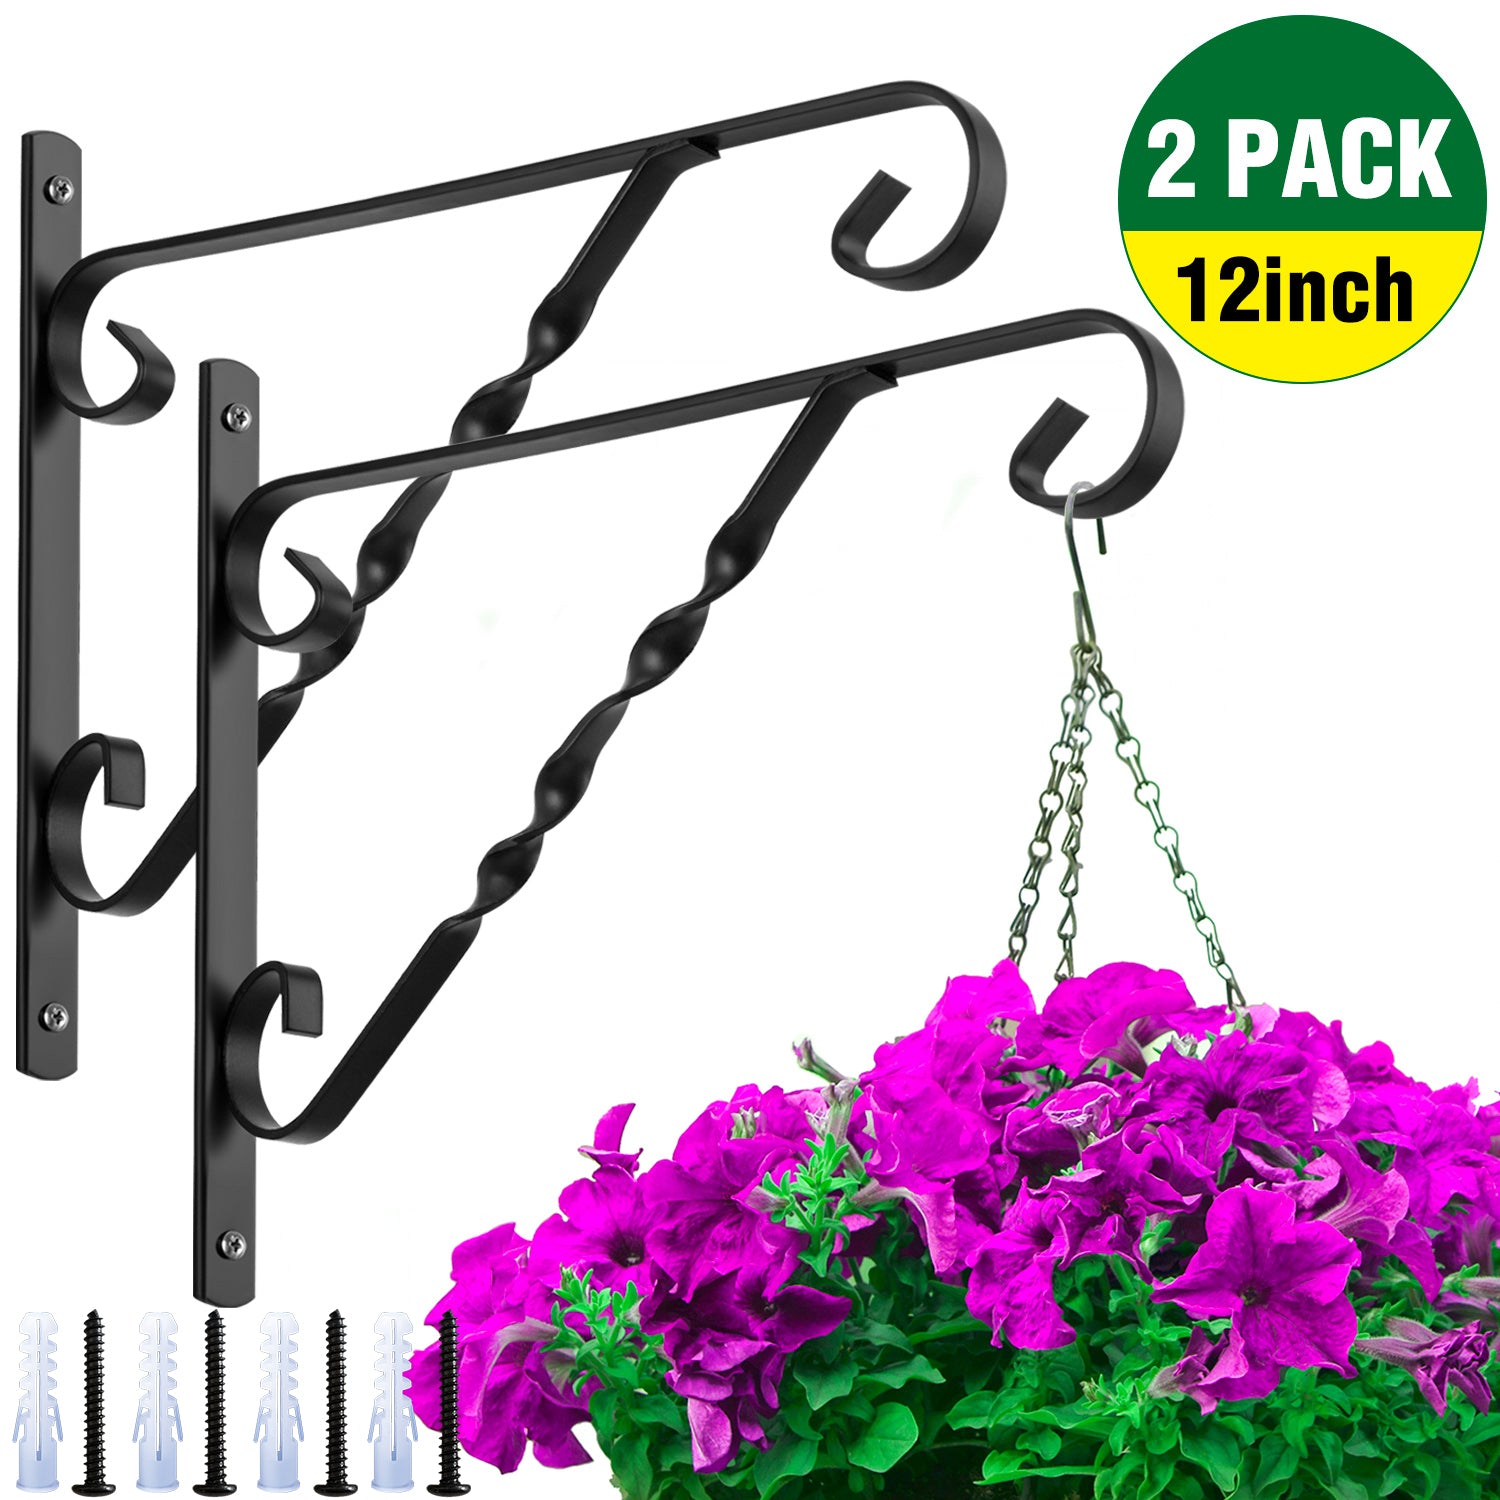 Wrought Iron Plant Container Hook - Wall Bracket & Mount